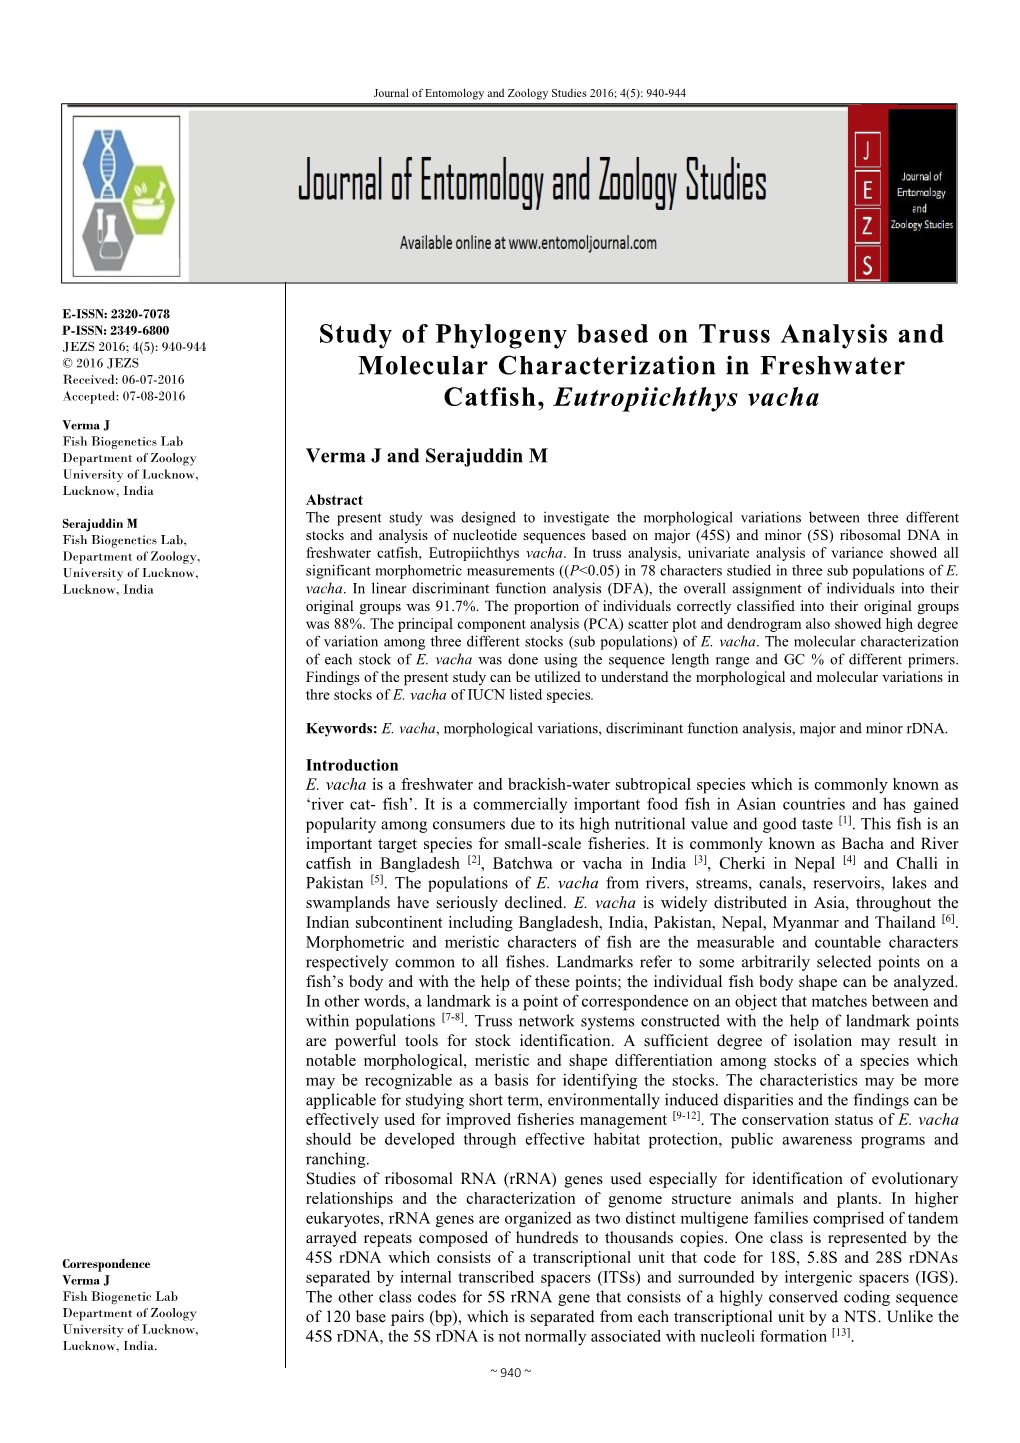 Study of Phylogeny Based on Truss Analysis and Molecular Characterization in Freshwater Catfish, Eutropiichthys Vacha